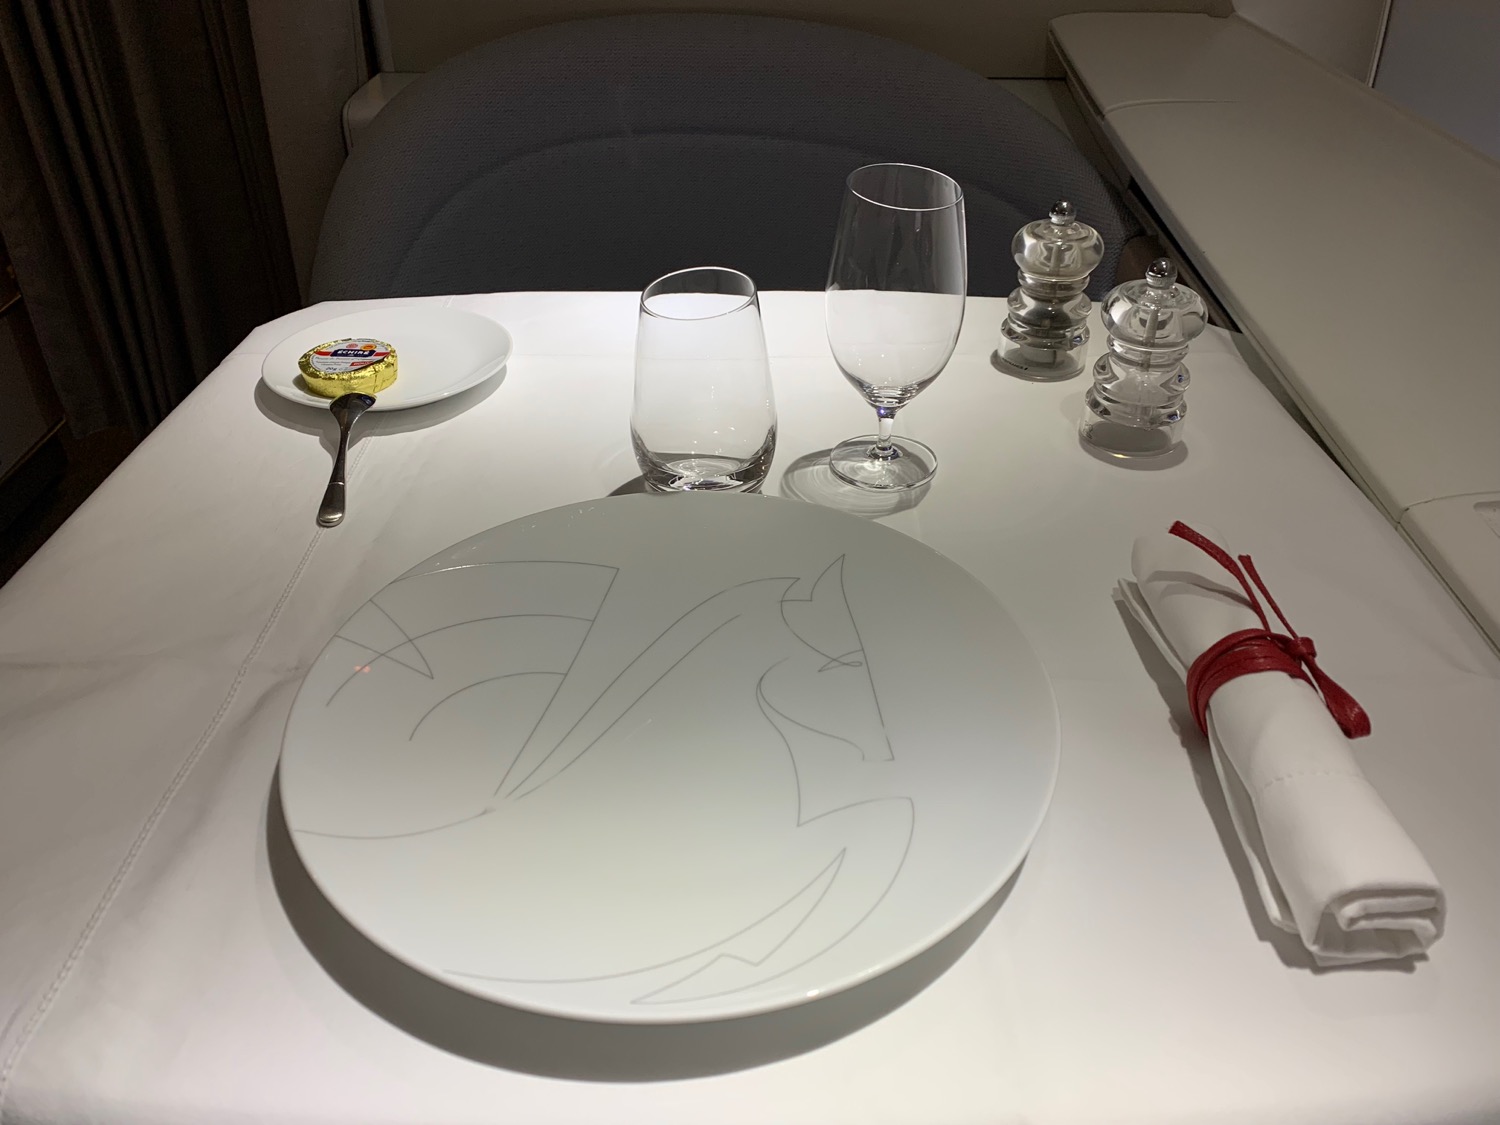 a plate and glasses on a table